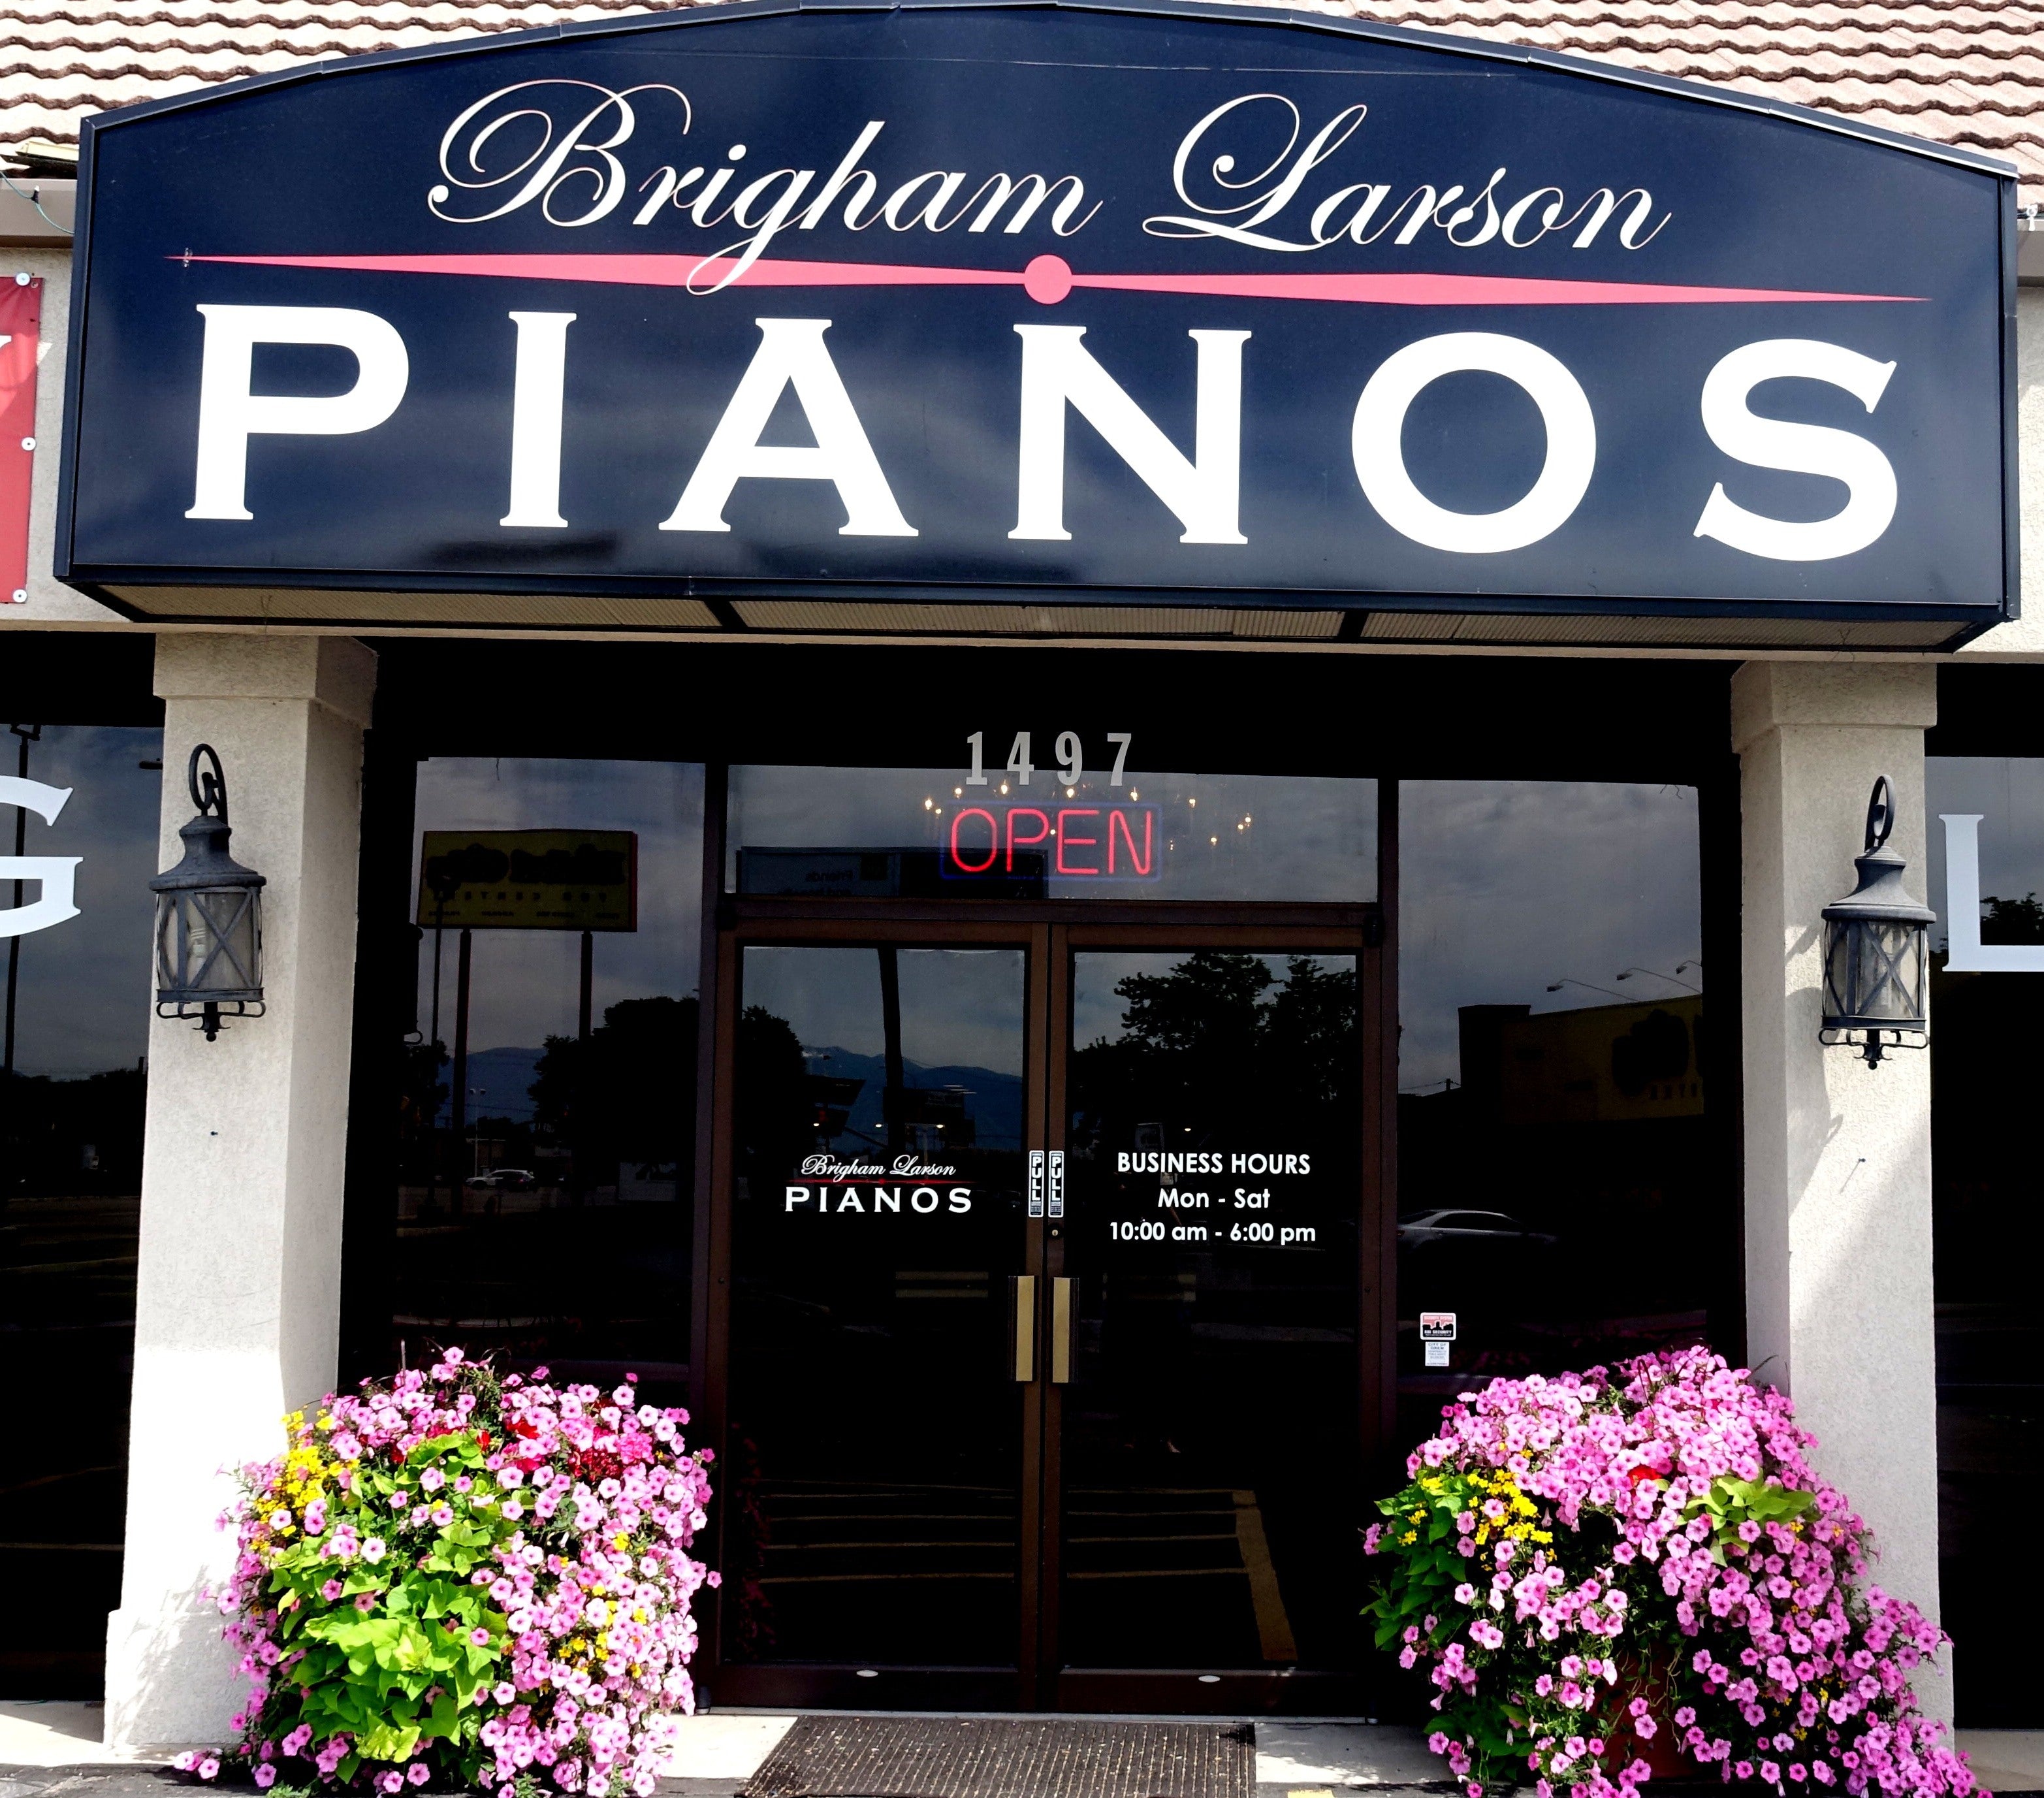 Load video: Drone Fly Through Tour Video of Our Many Piano Showrooms and Piano Shop Areas... ENJOY!!